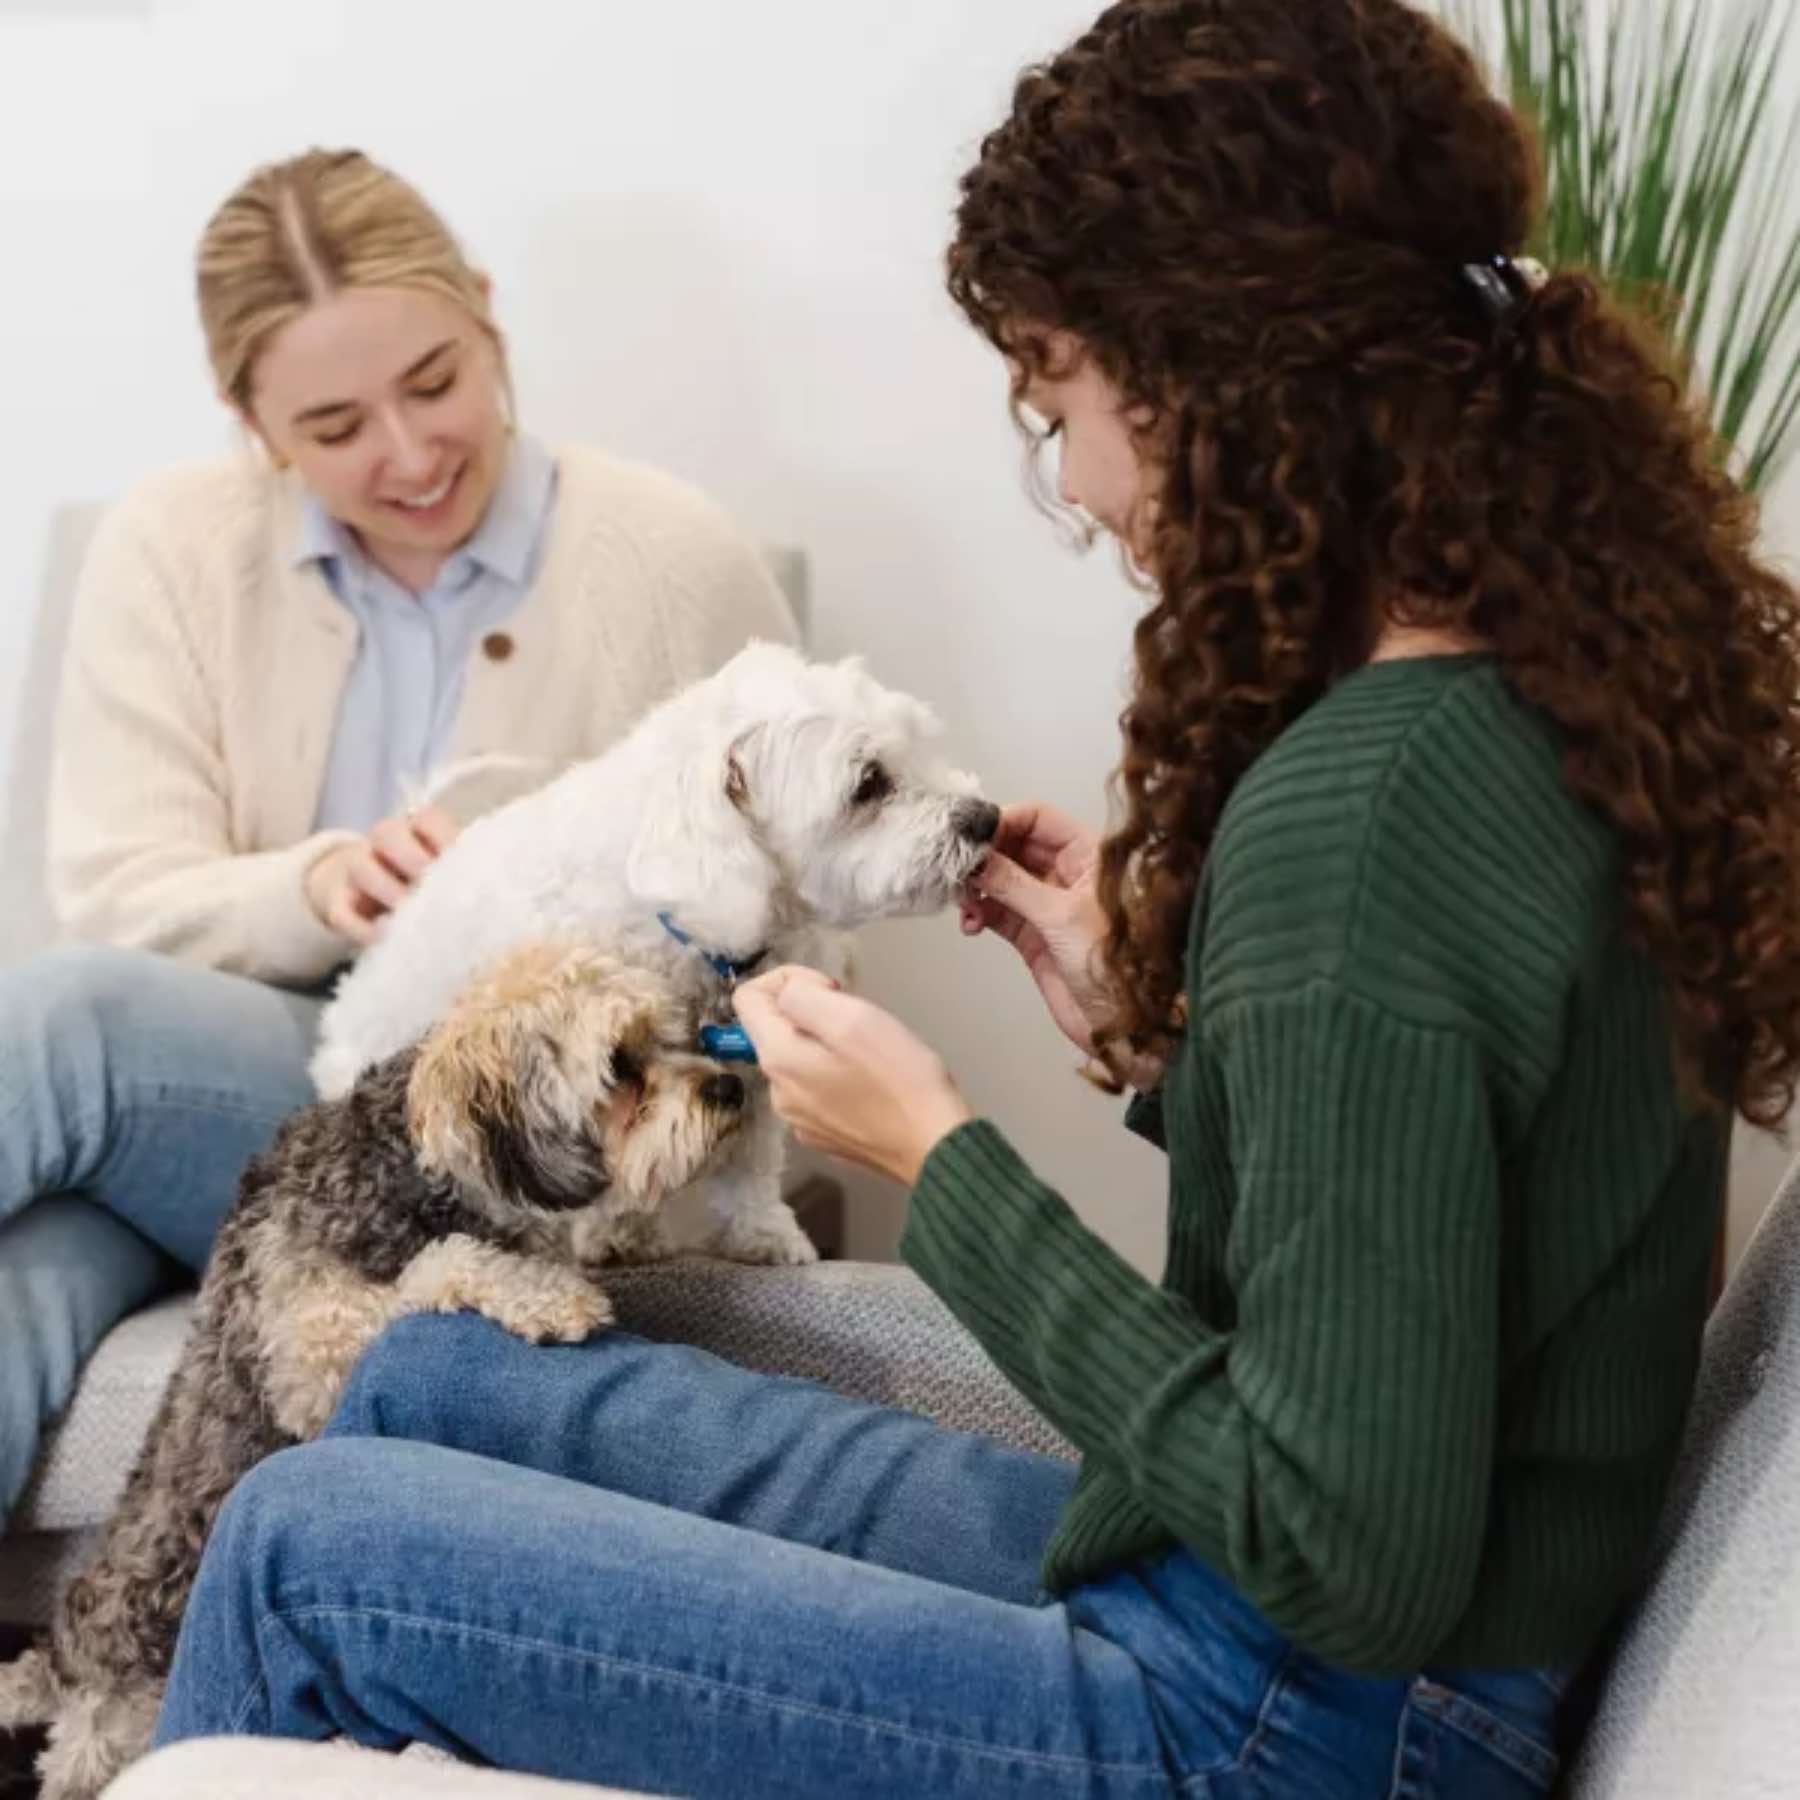 Women playing with puppies are enjoying the health benefits of pets - learn more with Zerorez.